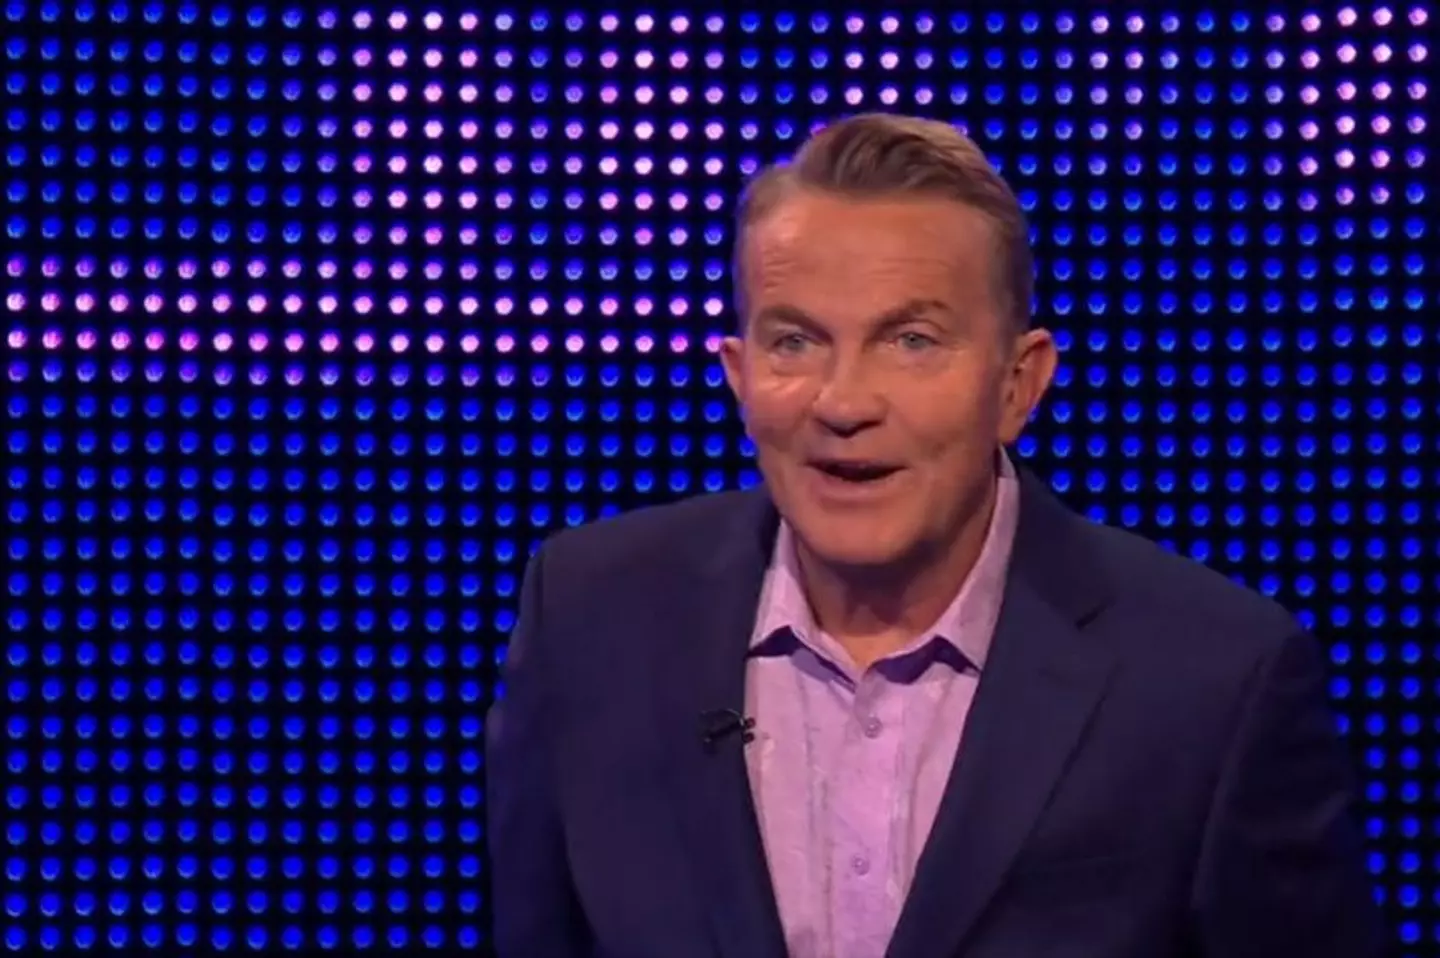 Bradley Walsh was absolutely stunned.